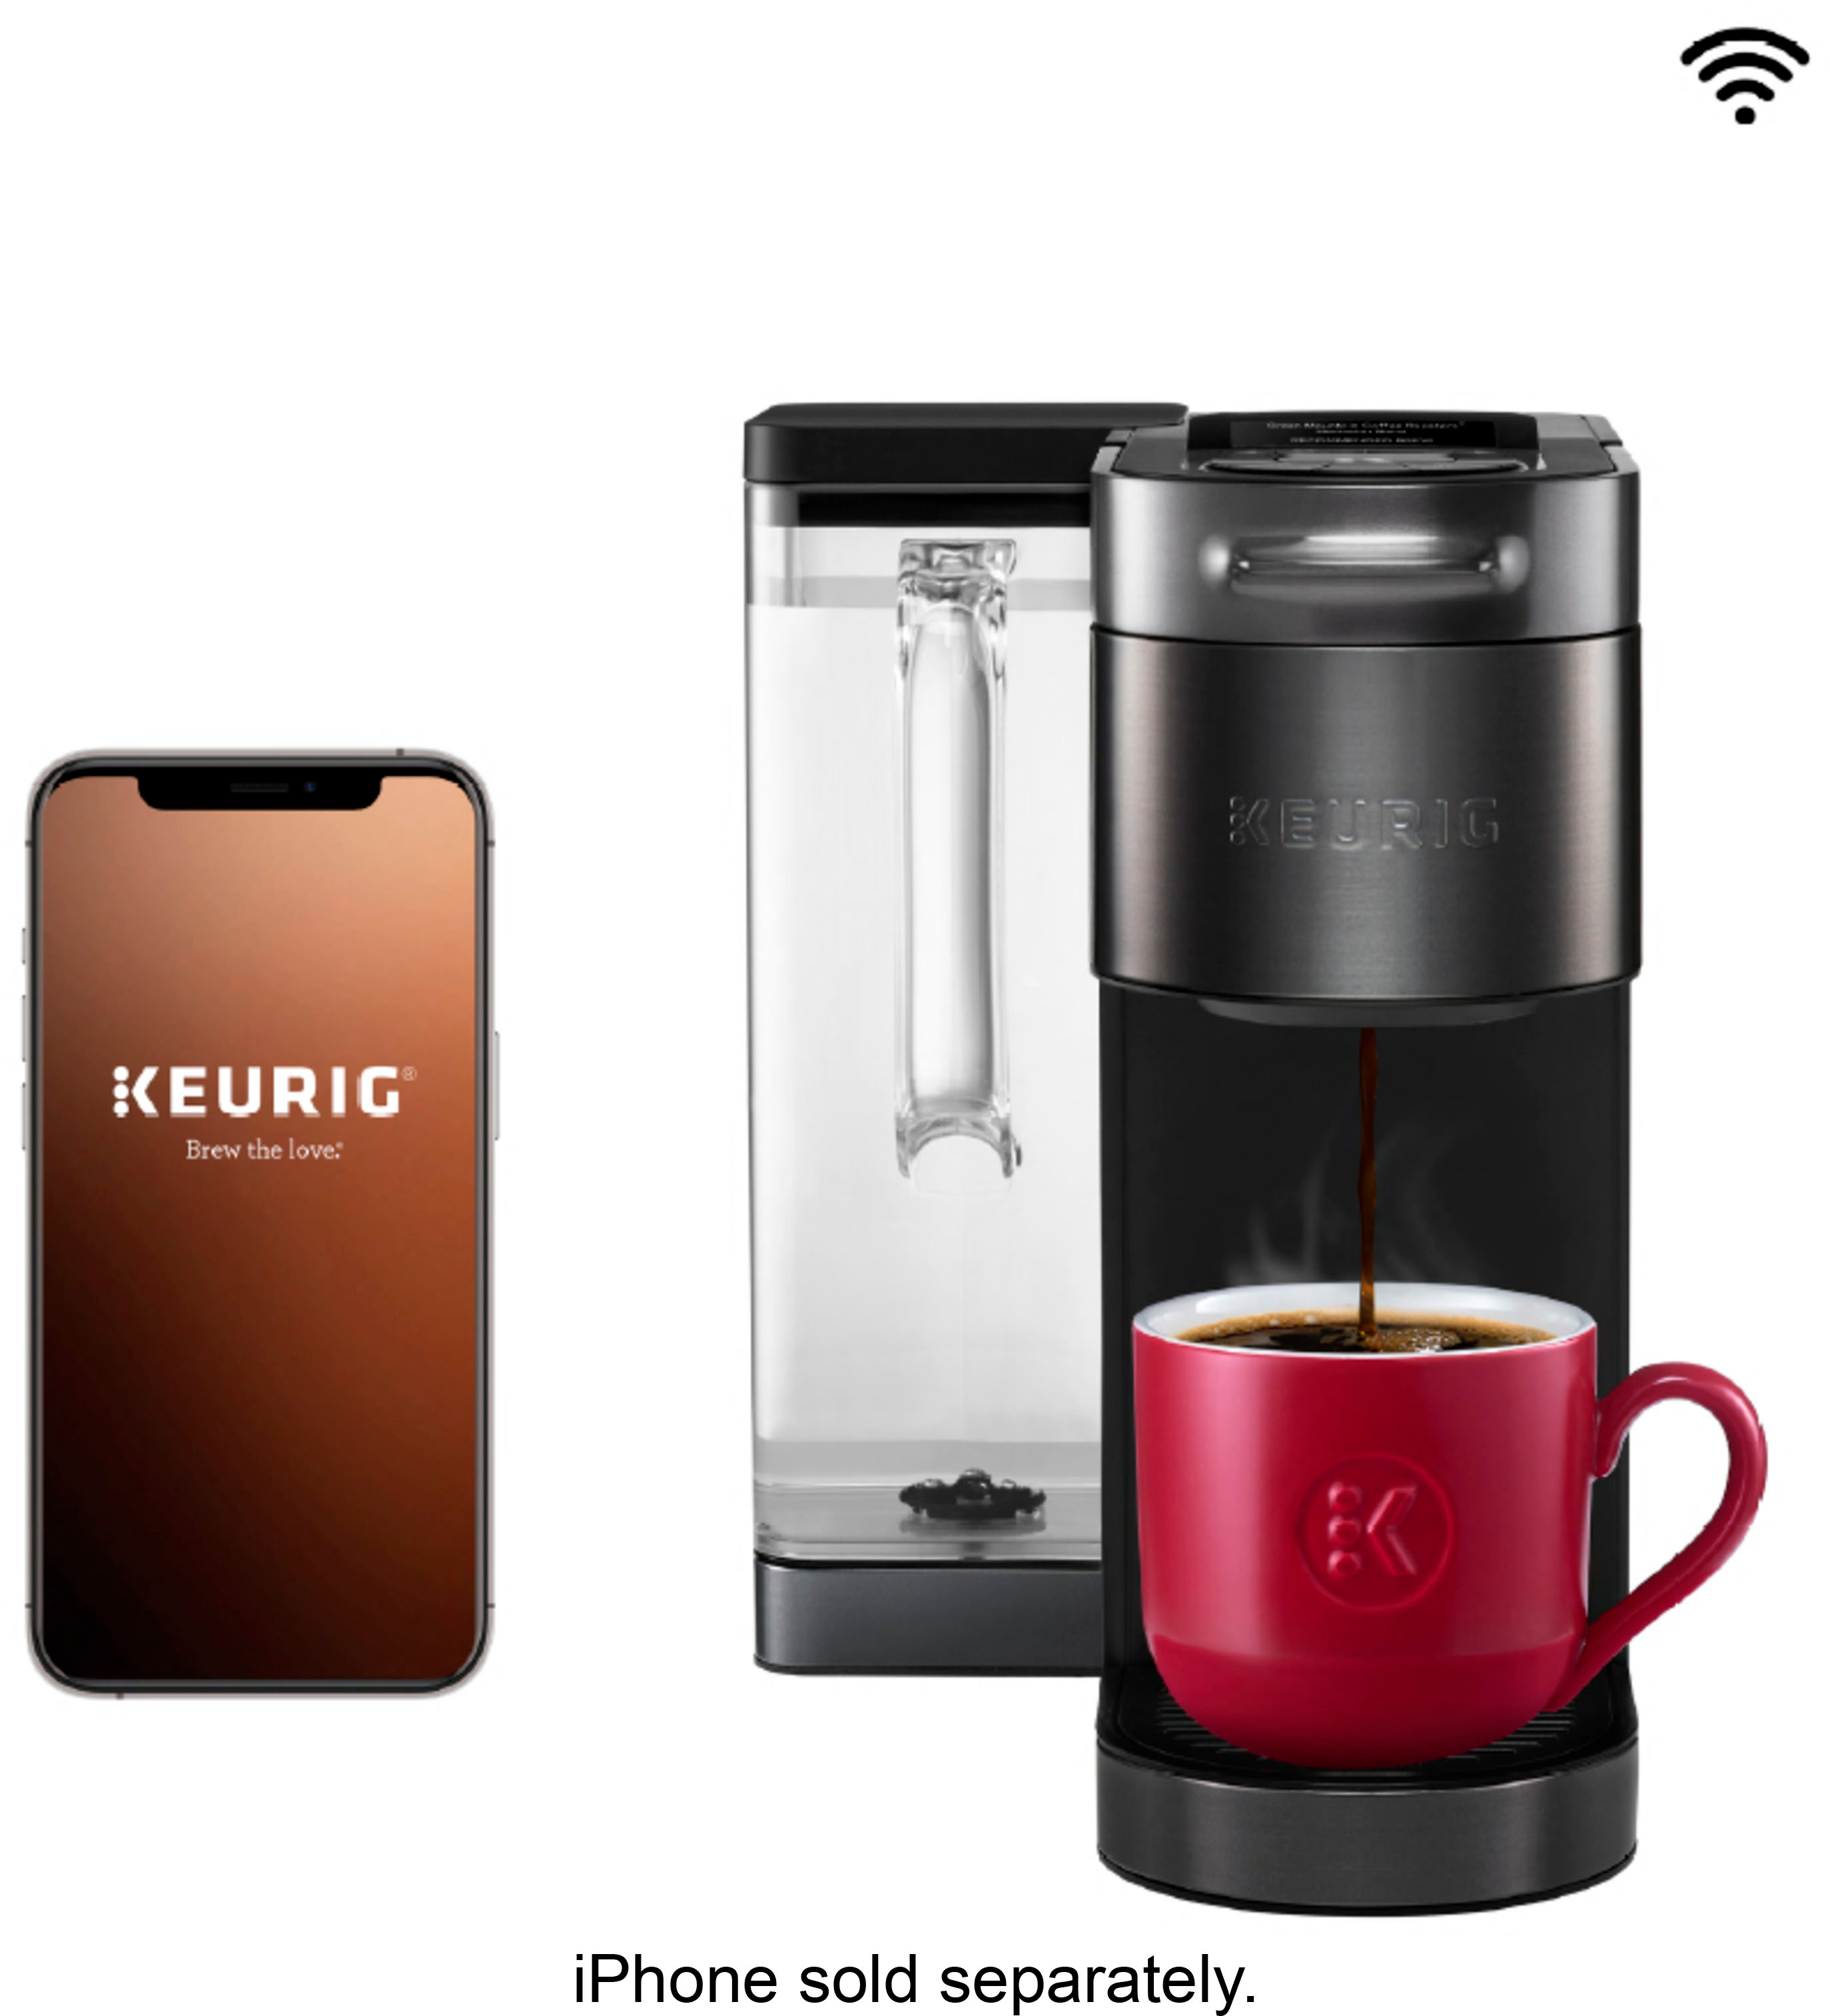 New Single Serve and K-Cup Coffee Maker 